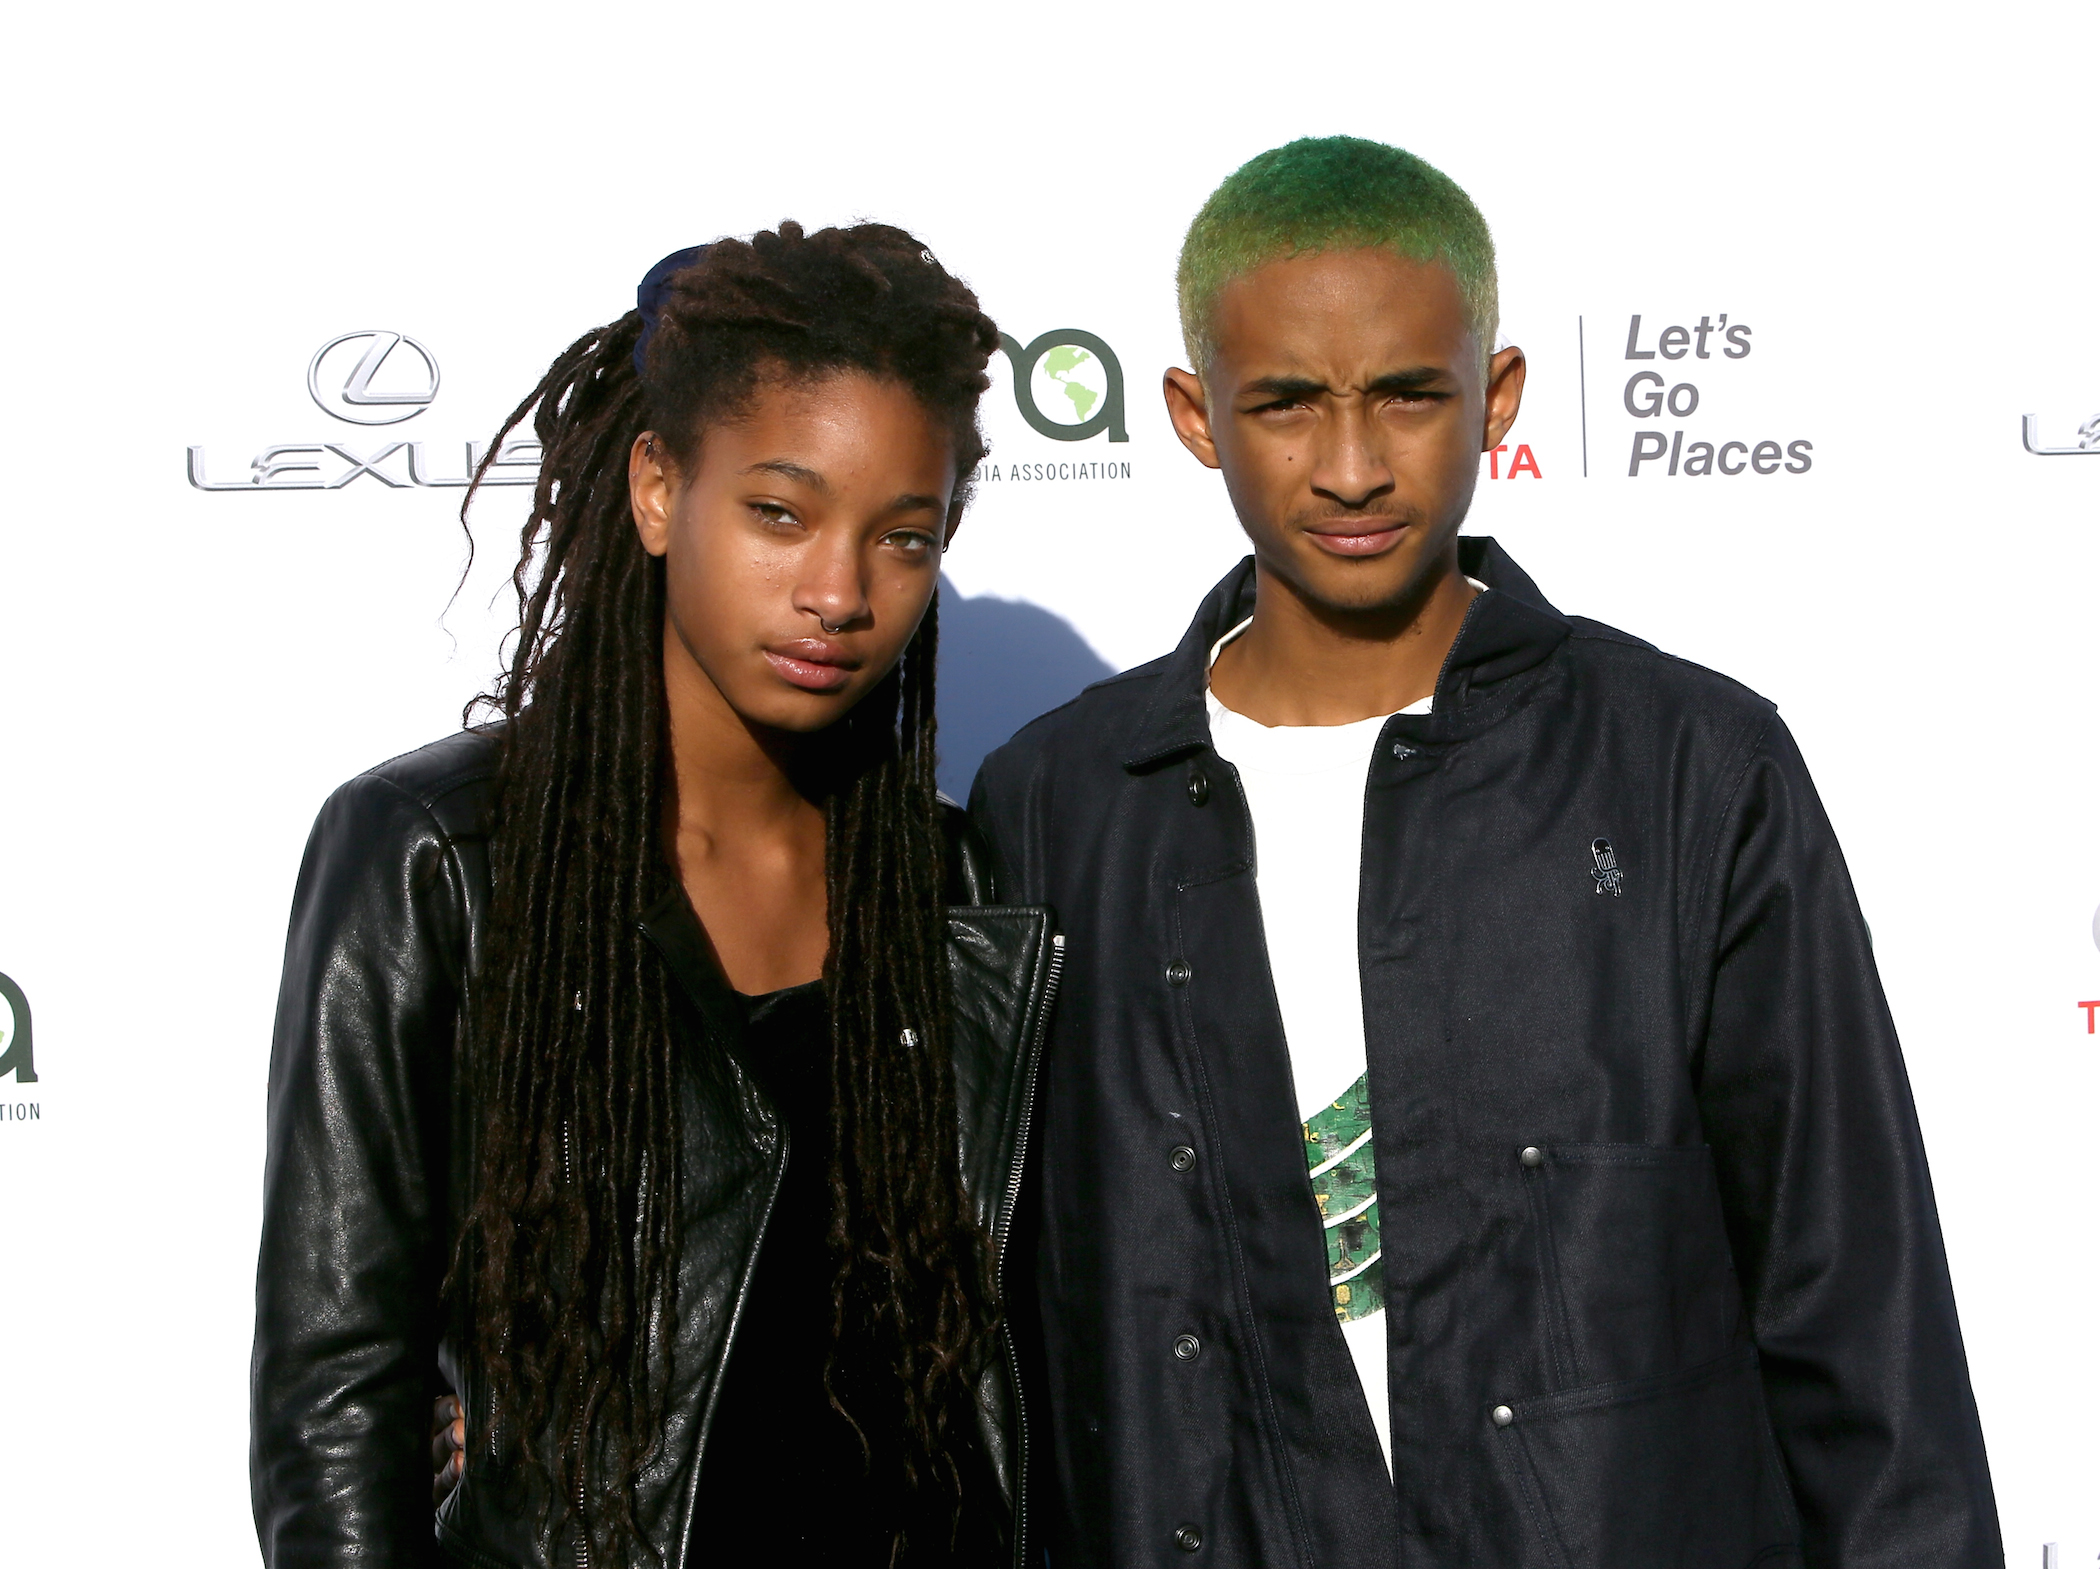 Willow Smith (L) and actor Jaden Smith attend the 27th Annual EMA Awards